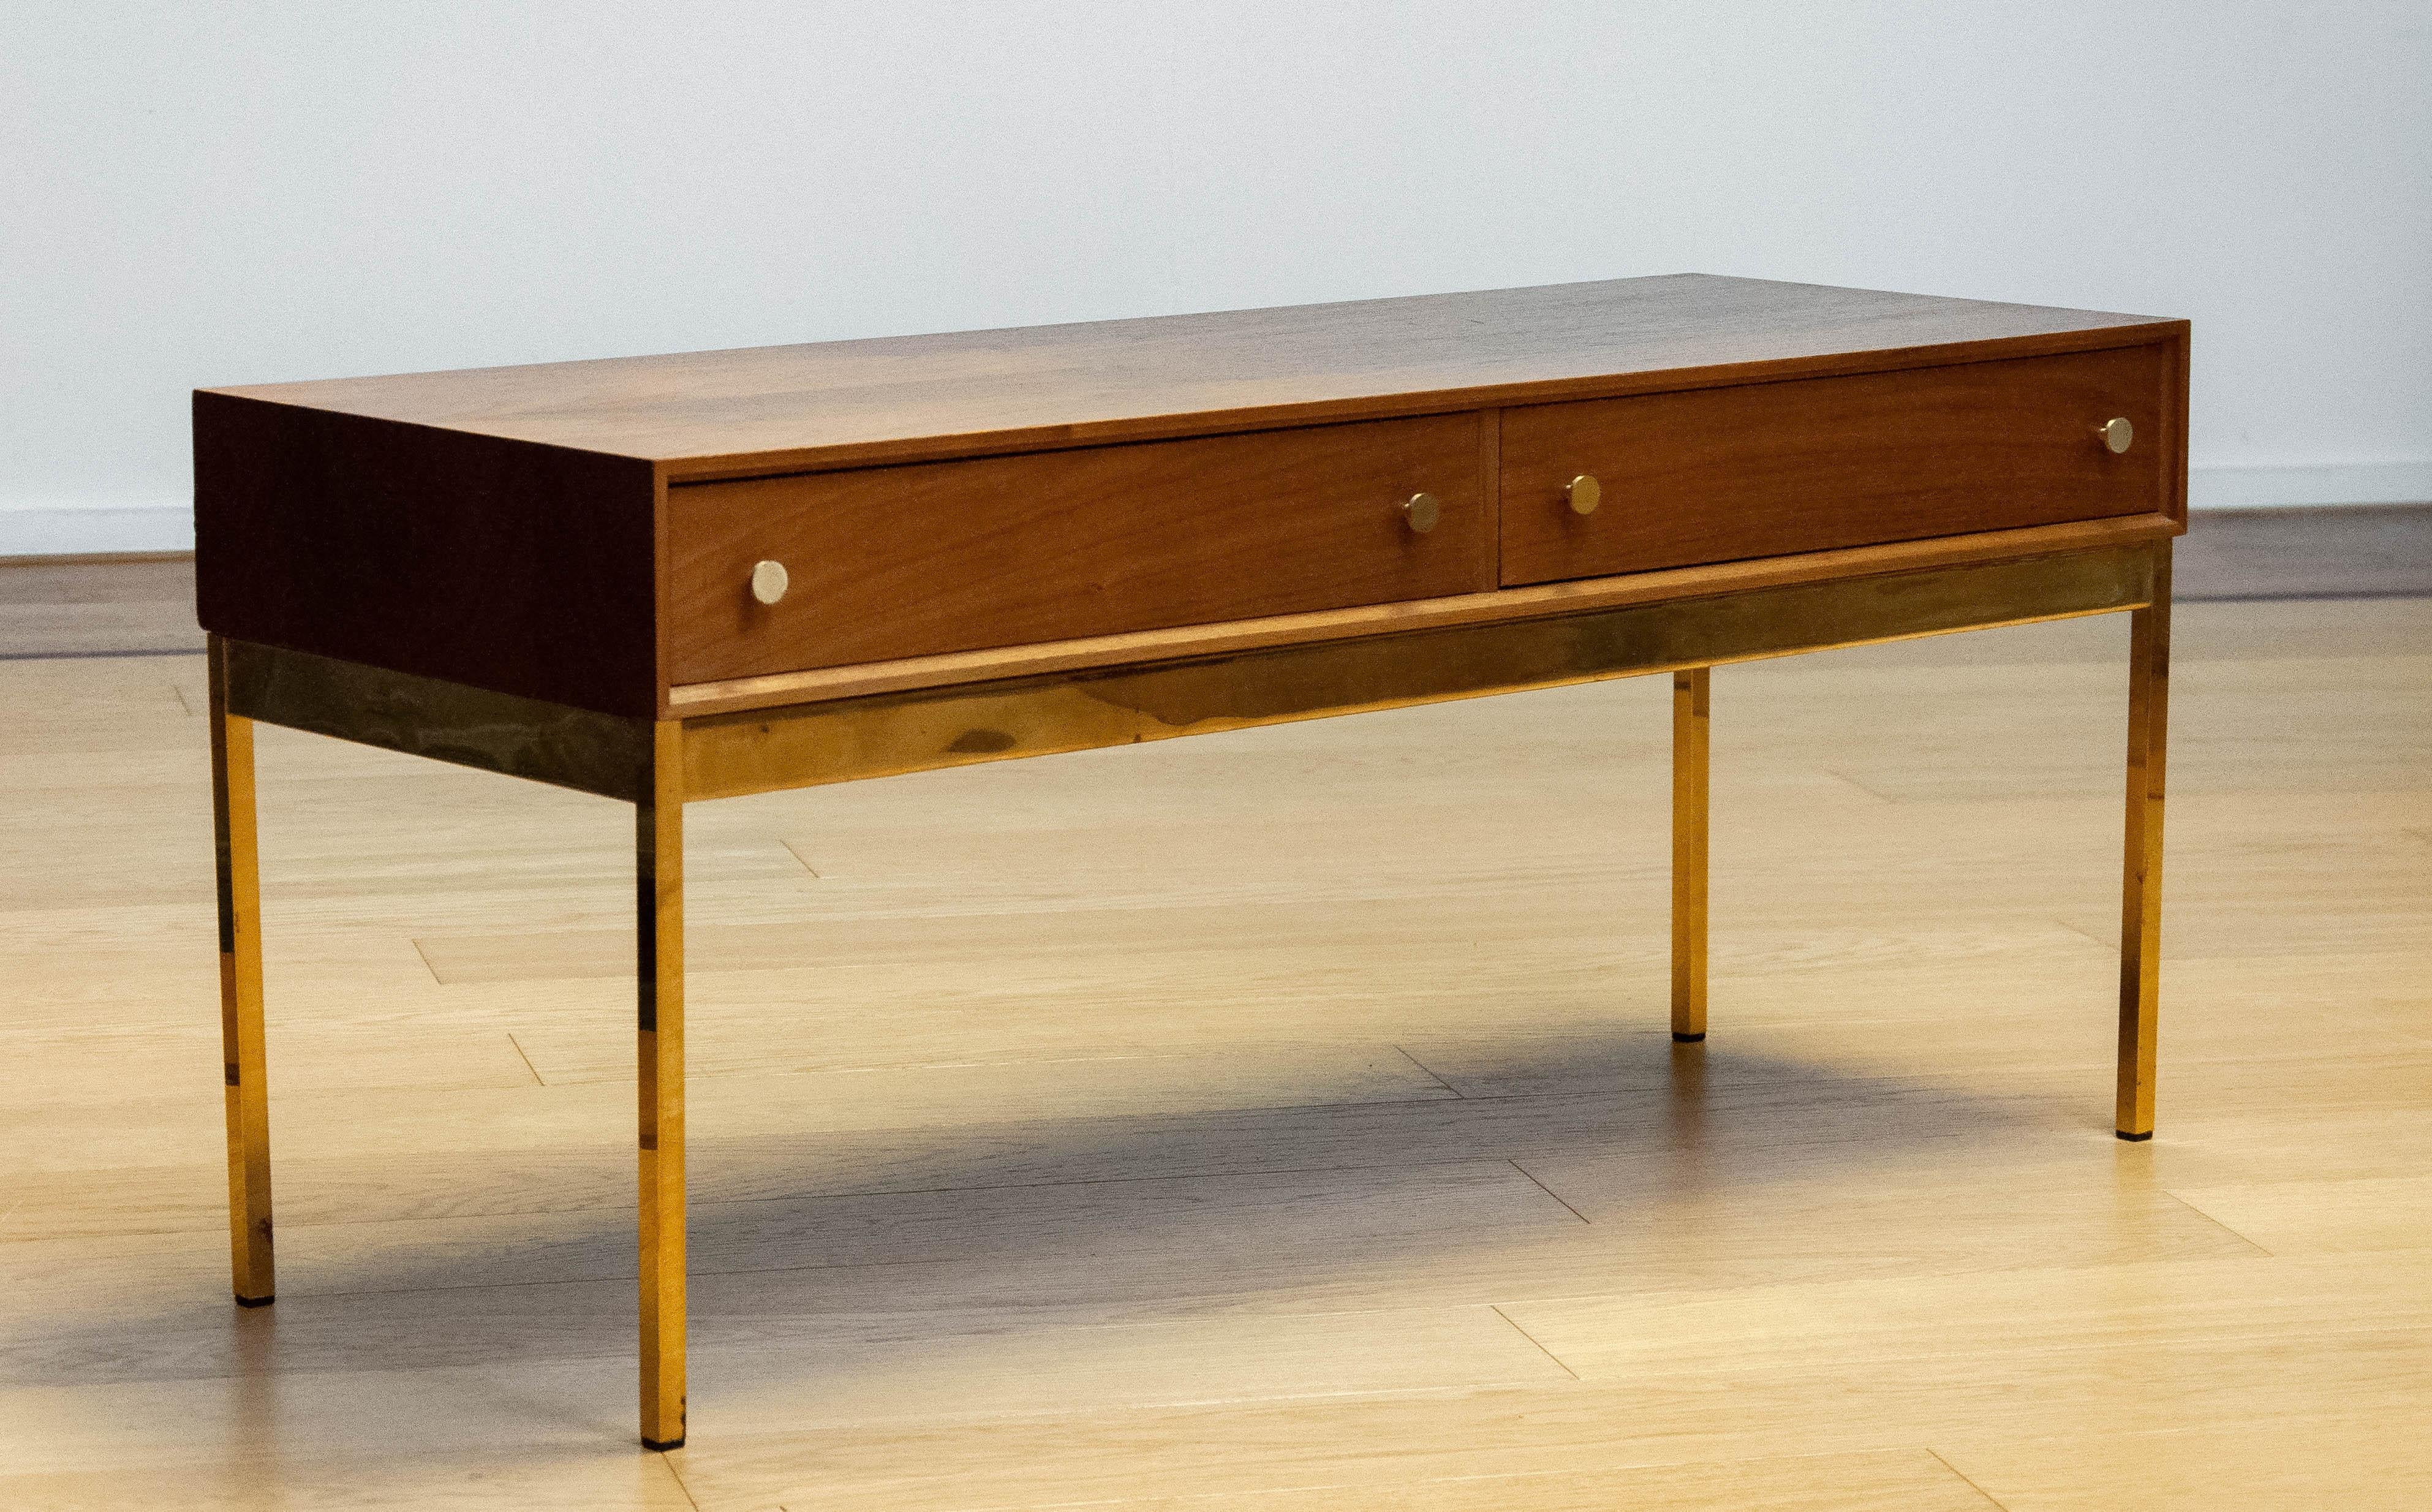 Beautiful and elegant slim drawer sideboard in walnut with brass details resting on slim brass legs. This sideboard, model 60, is designed by Alf Svensson and Ynvar Sandström for the AB Nybrofabriken in Nybro Sweden.
This elegant cabinet is a